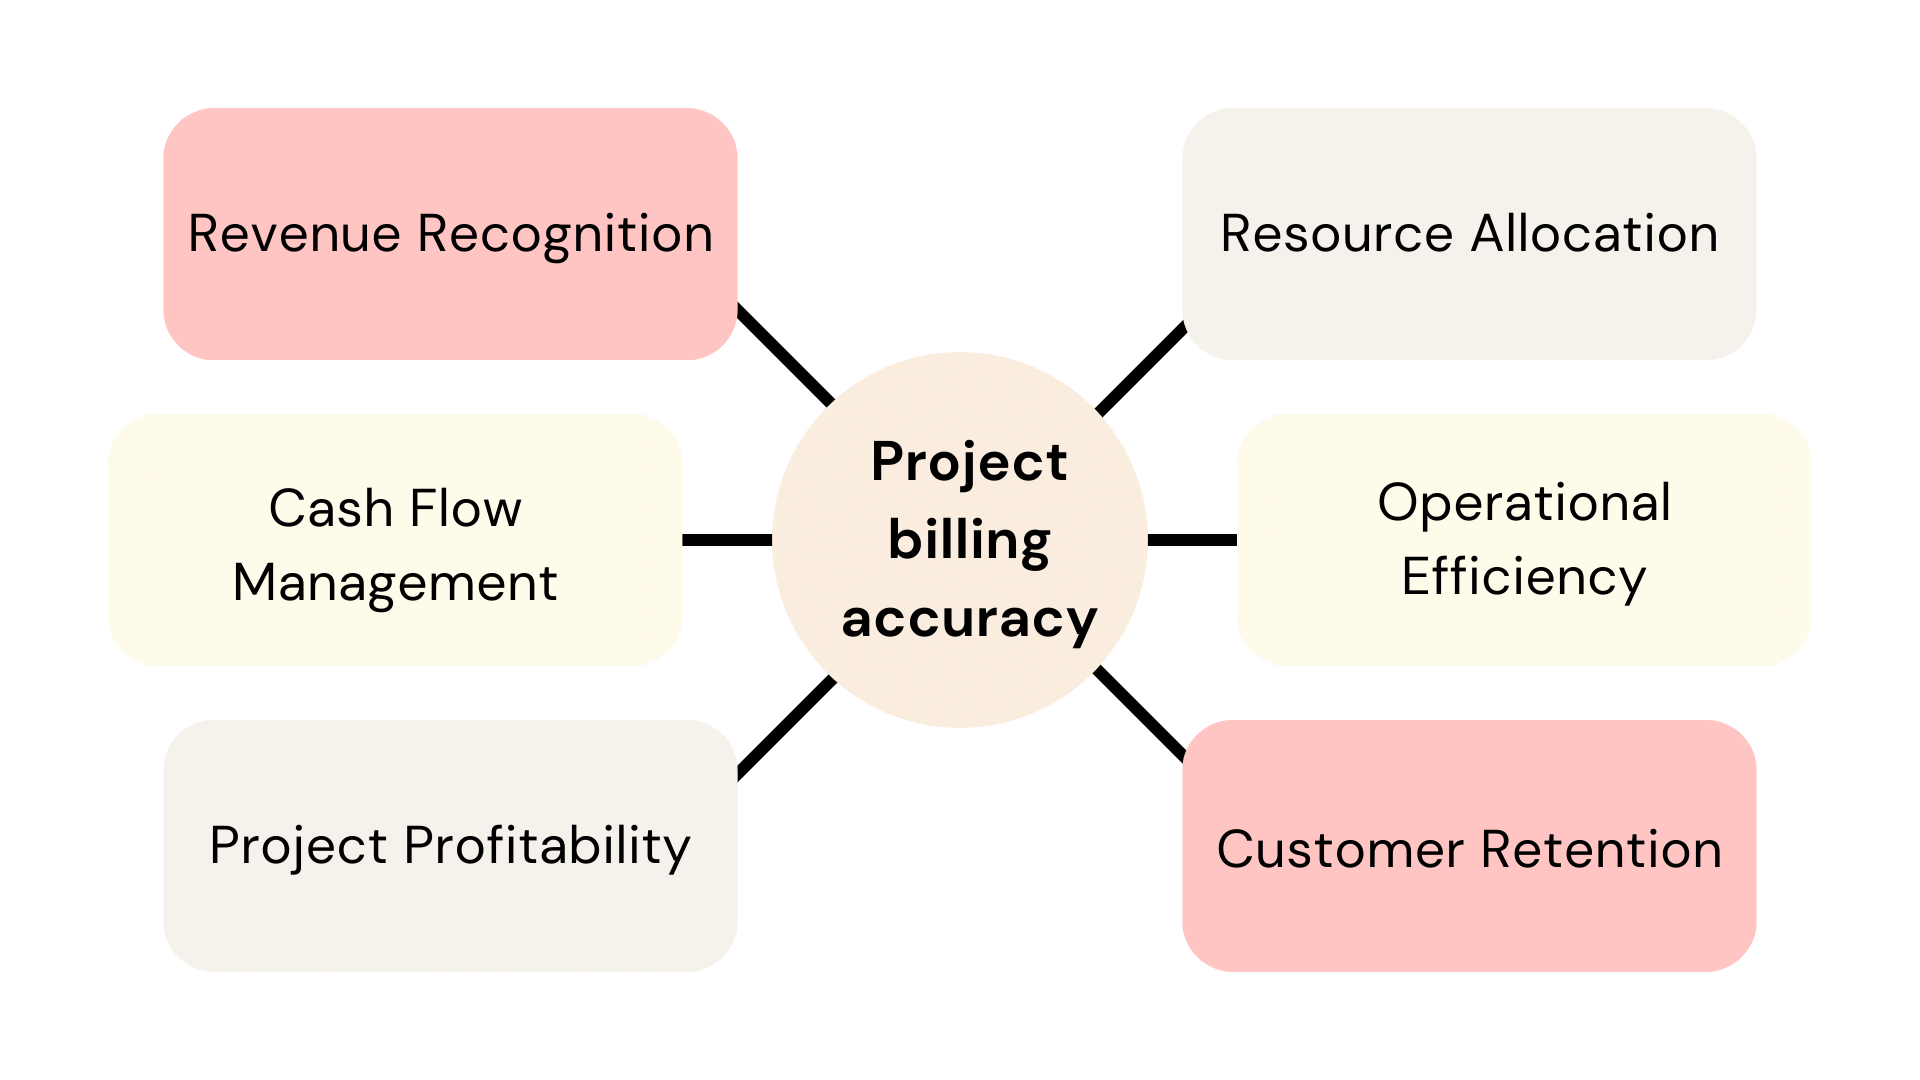 Project billing accuracy